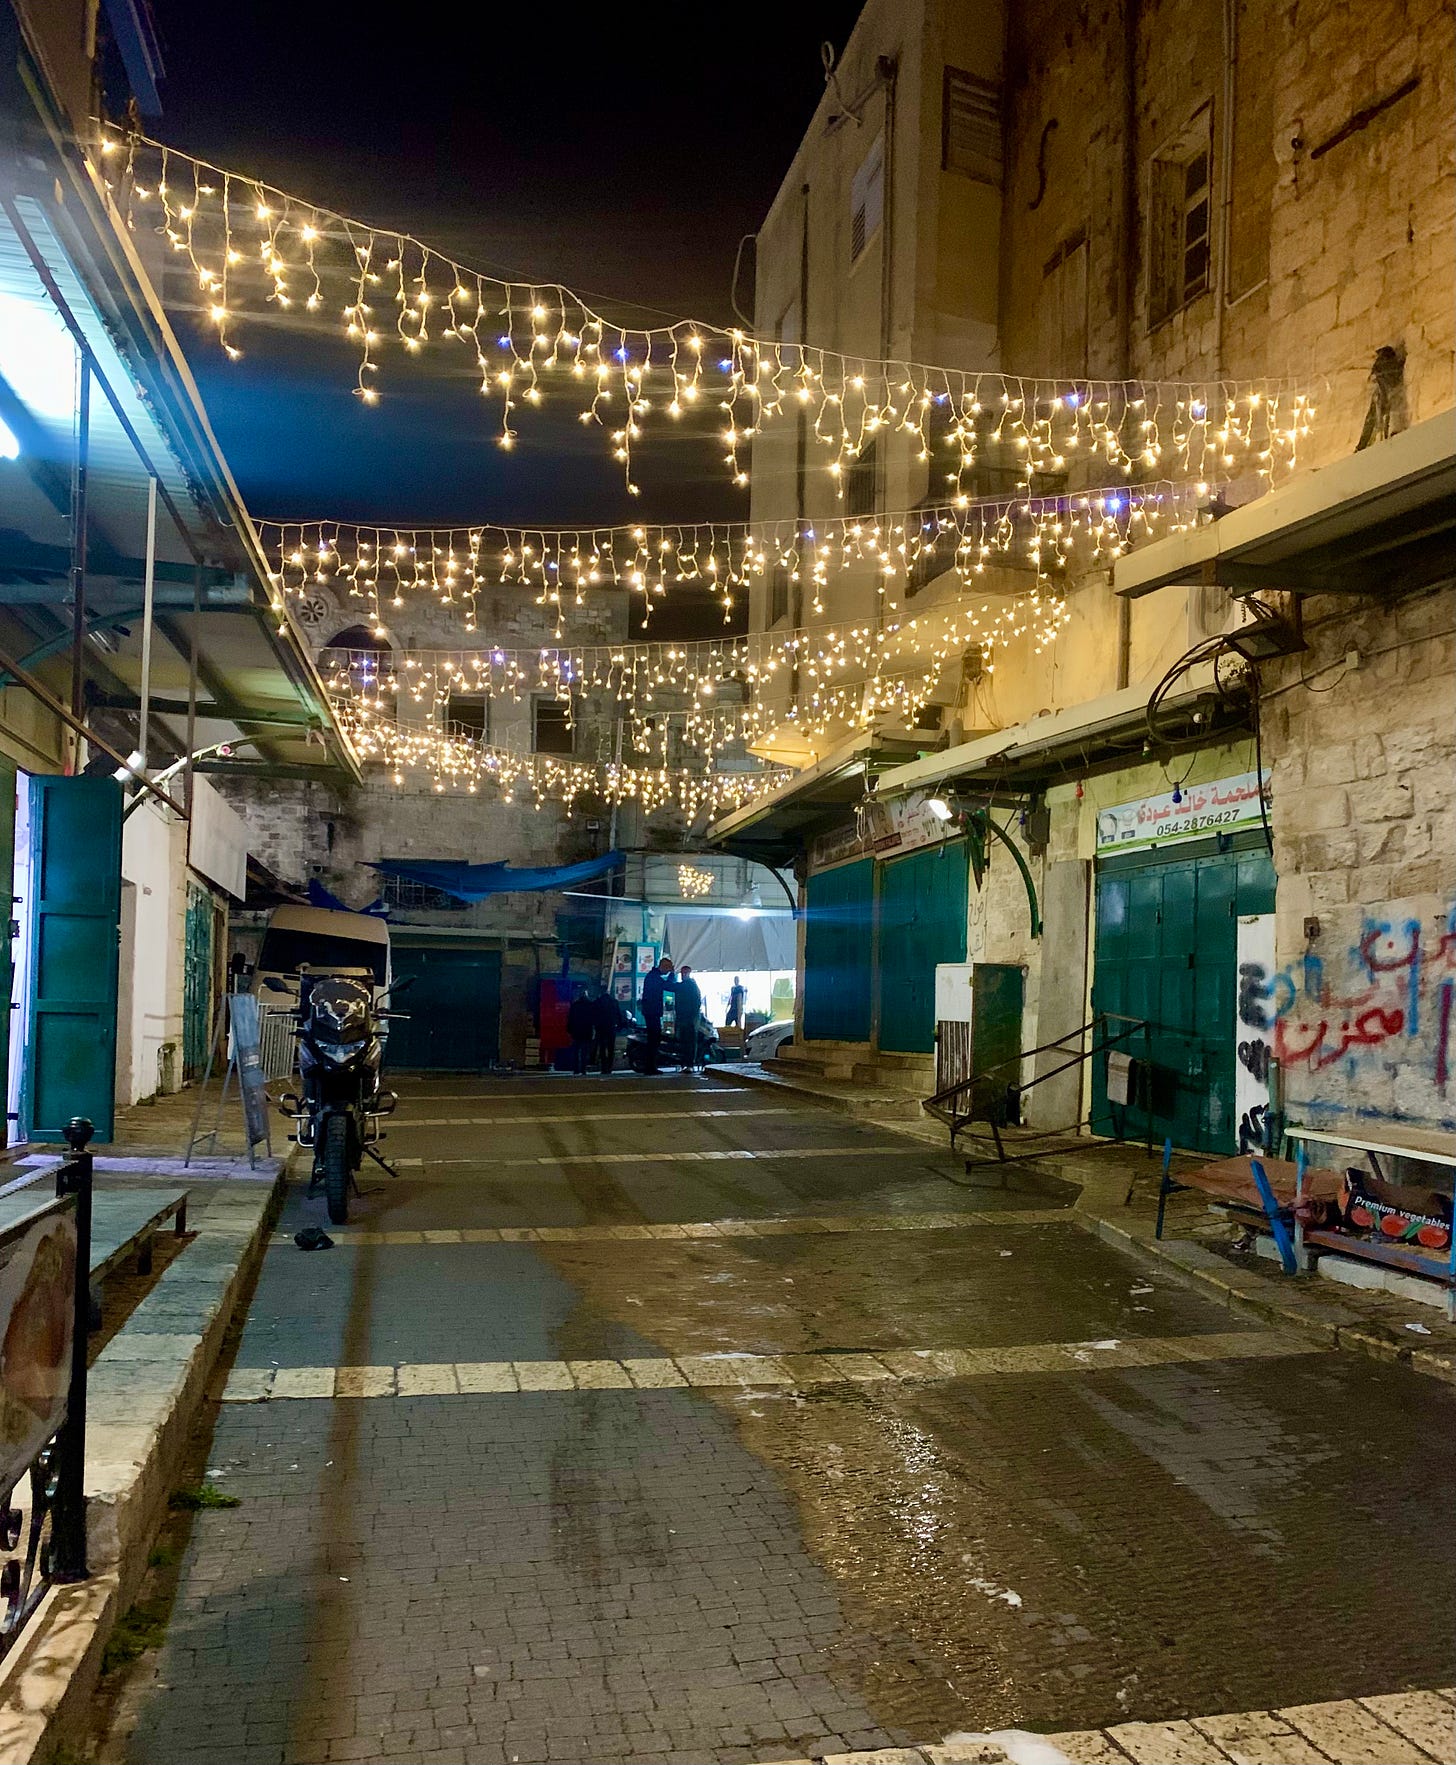 an image of a street in Nazareth Old City, decorated with strings of twinkling lights strung across the cobbled street